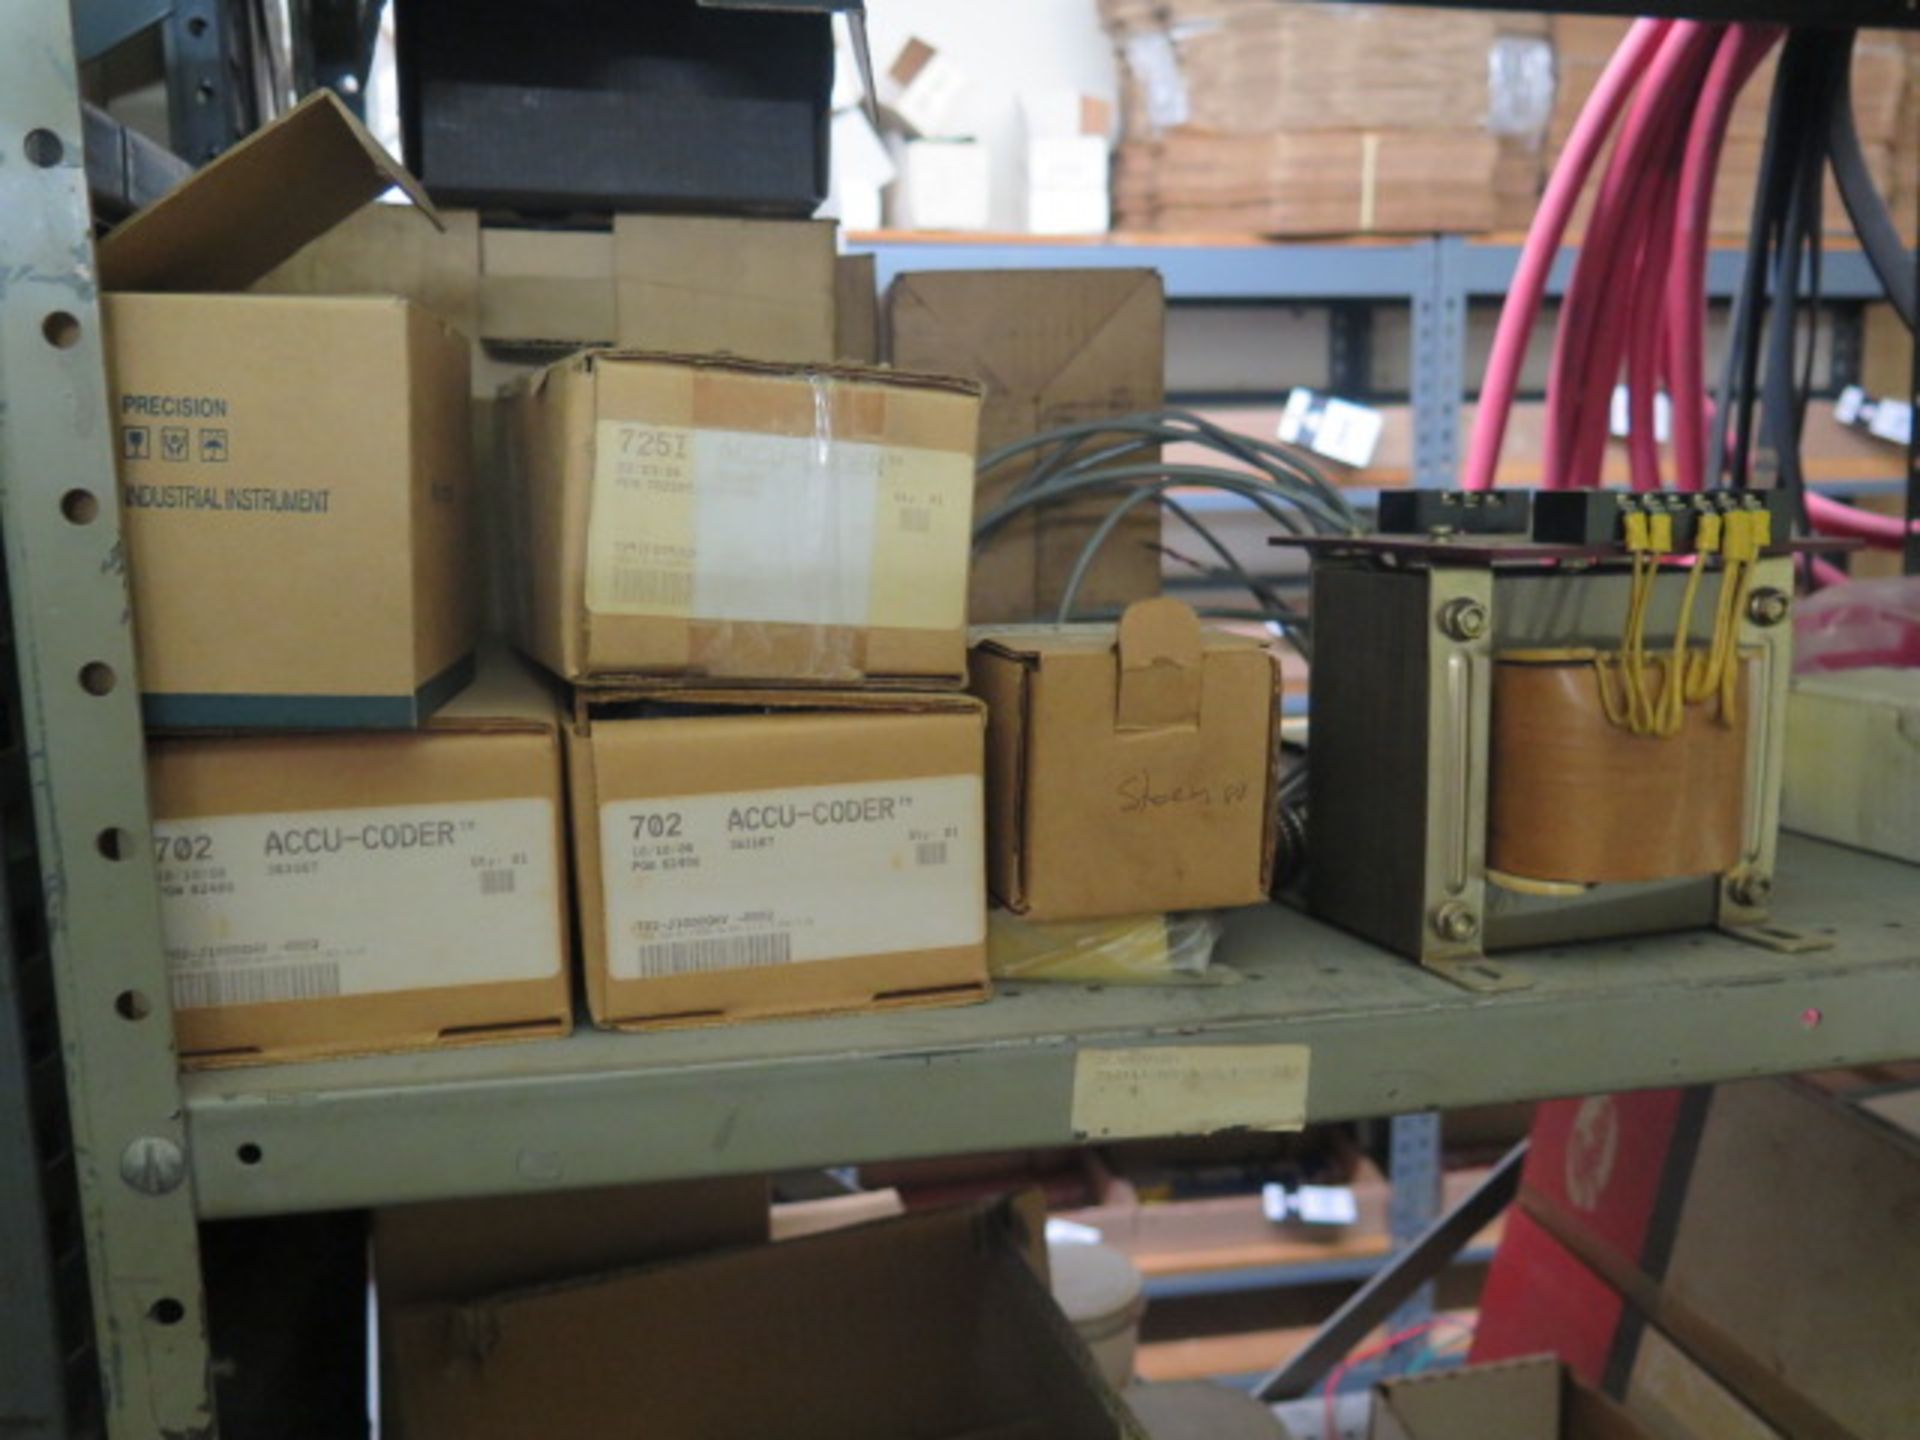 Large Quantity of Machine Replacement Parts Including Spindles, Bearings, Pneumatic Collet - Image 25 of 30